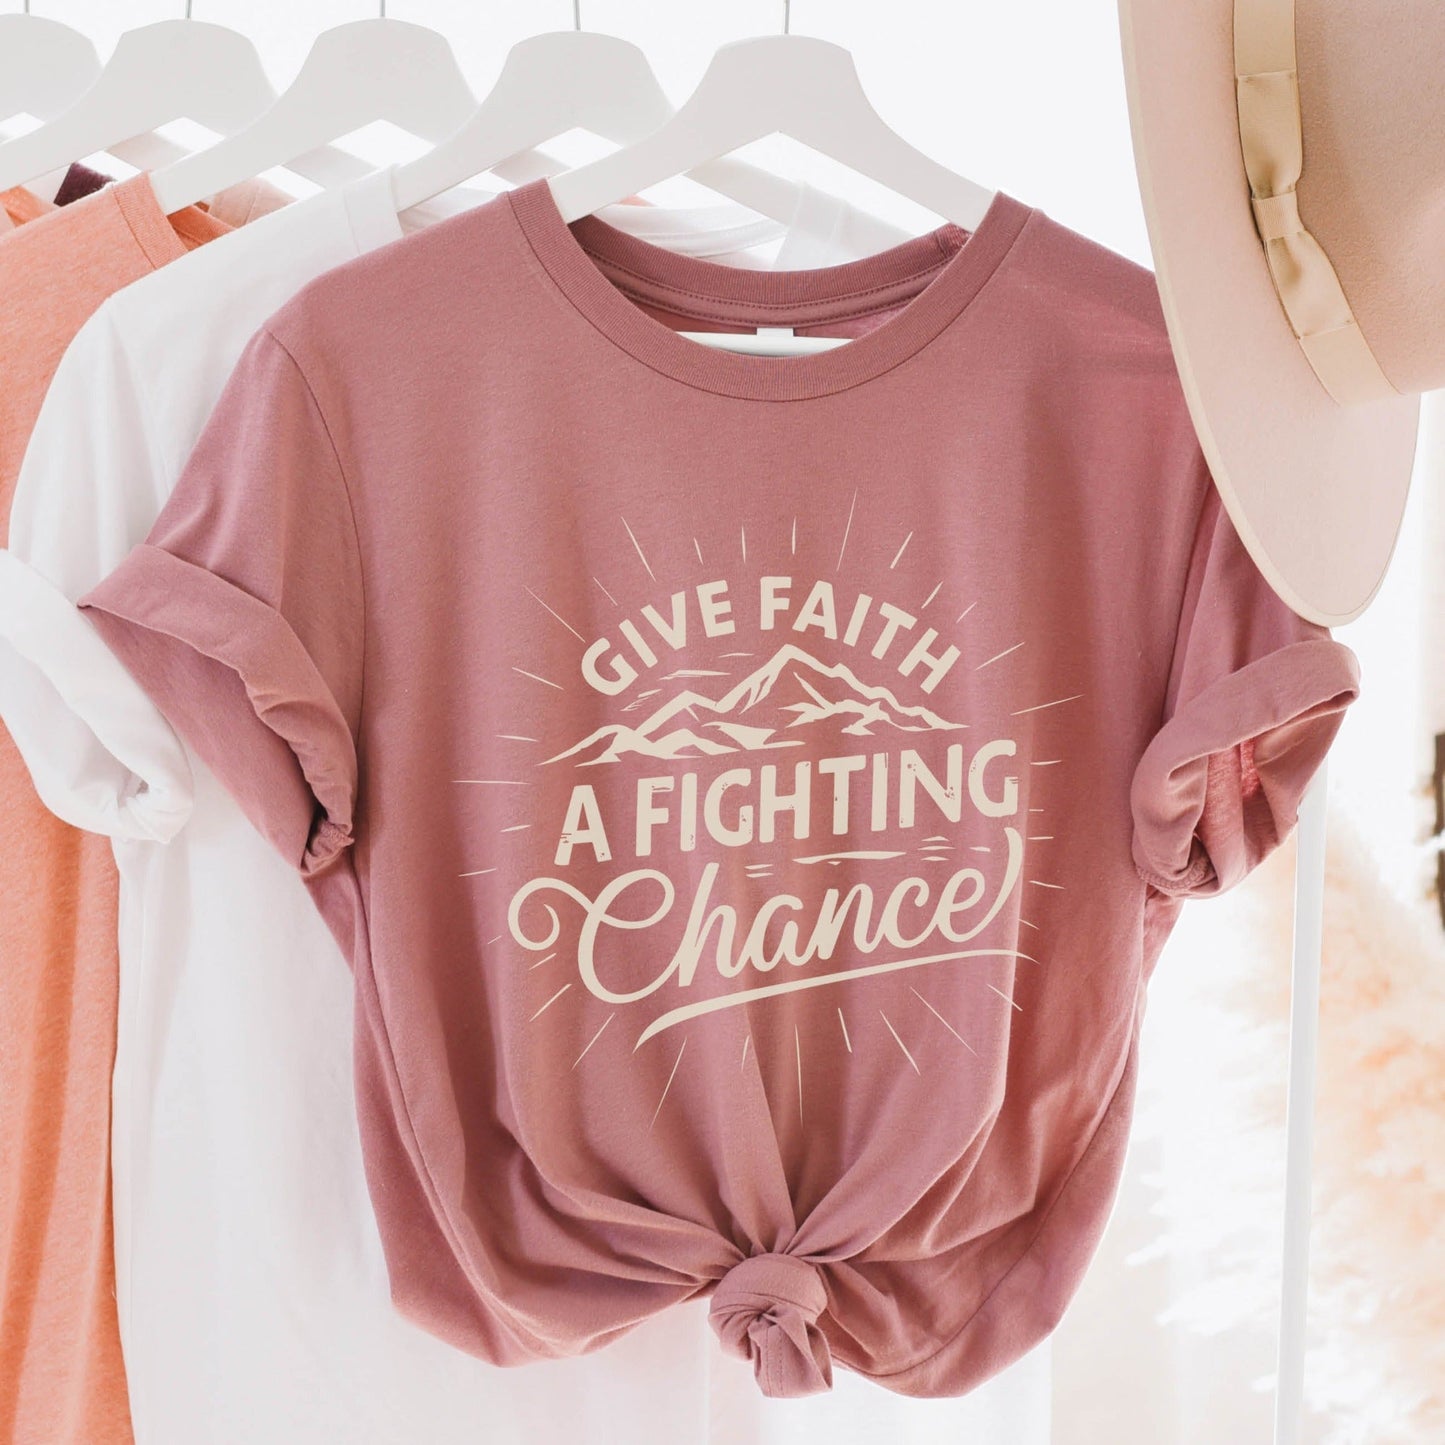 Trendy Mauve pink Unisex Tee with Christian Bible verse quote that says, "Give Faith A Fighting Chance" with retro sunburst and mountain graphics, t-shirt designed for faith-based men and women